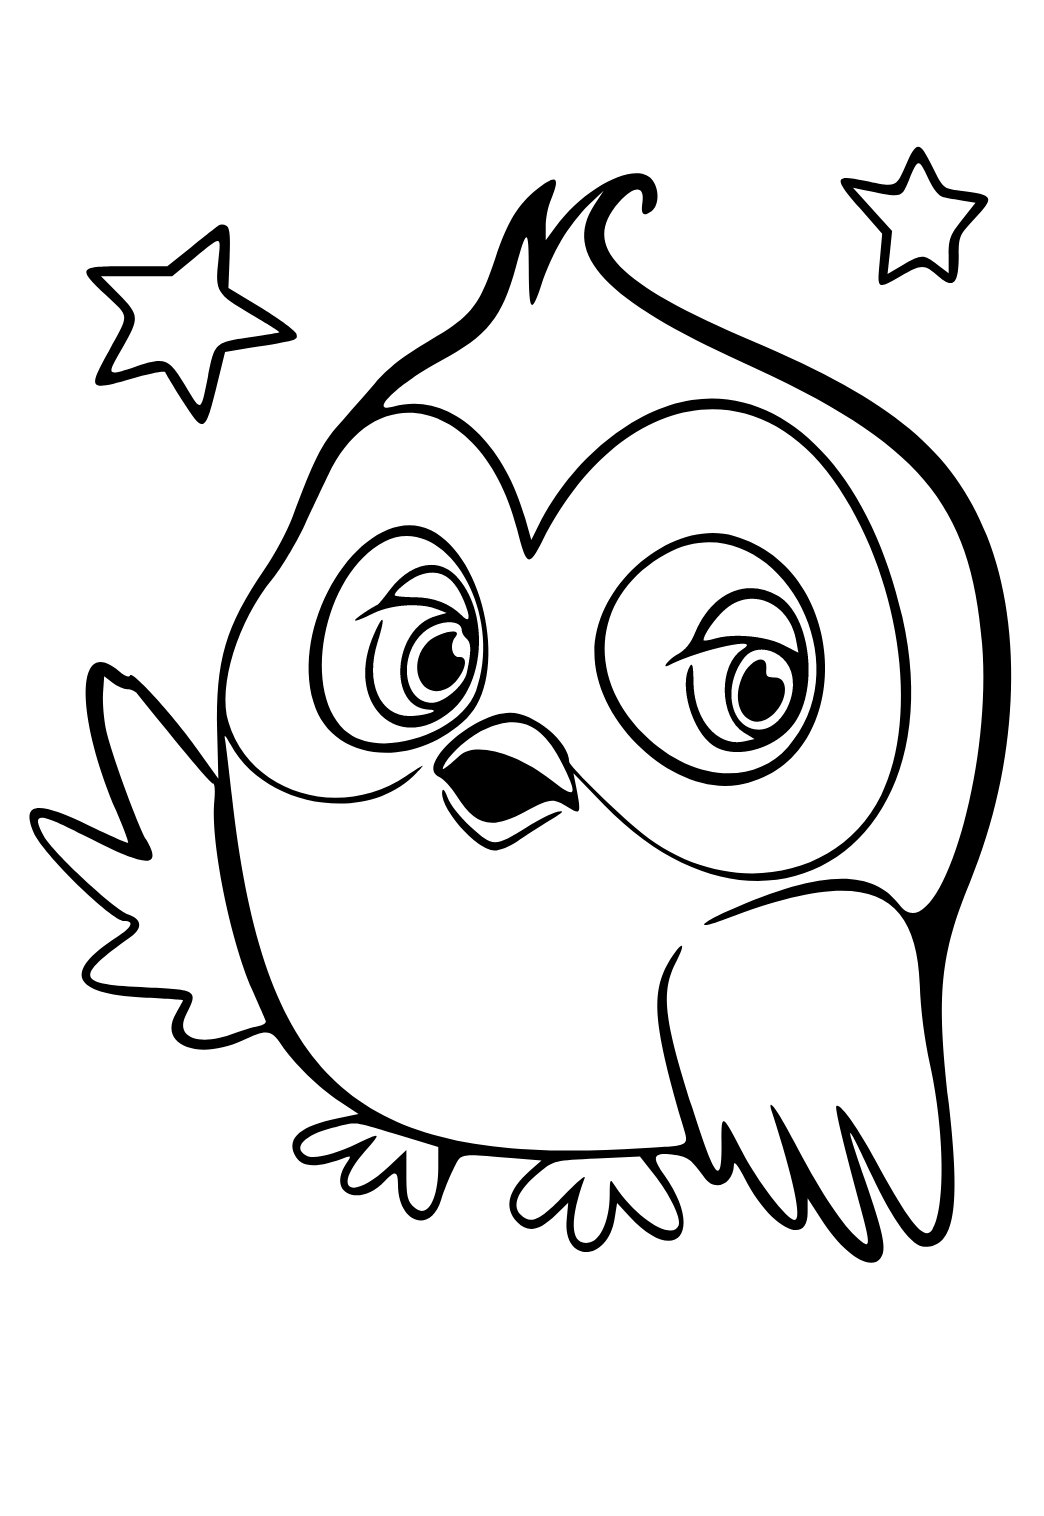 Free printable easy simple owl coloring page for adults and kids